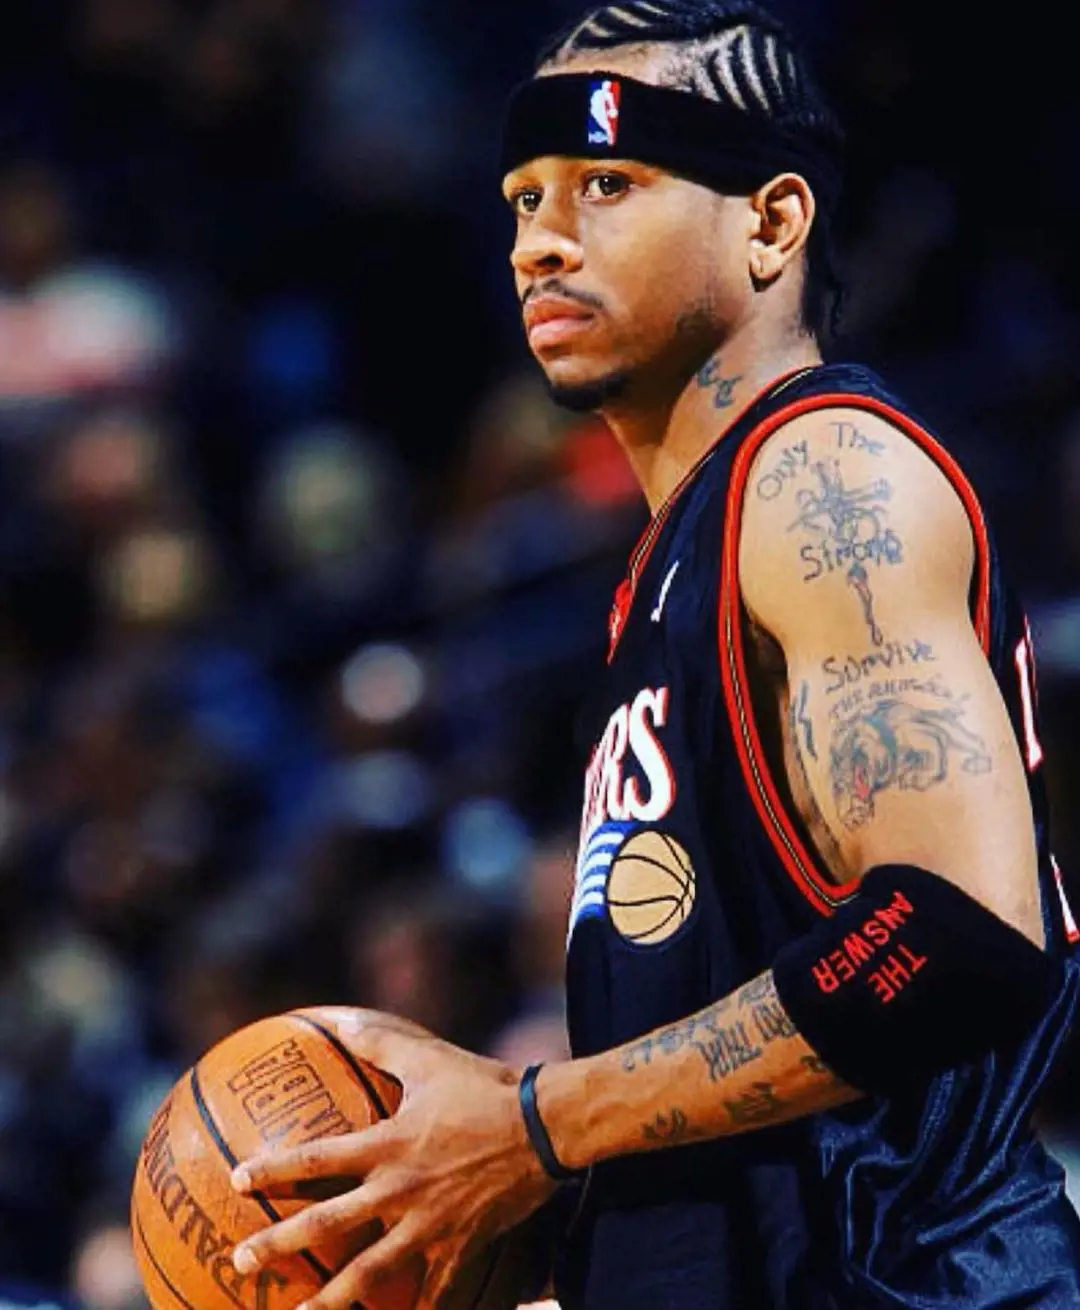 The Meanings Behind The 12 Coolest Tattoos In The NBA  Best sleeve tattoos  Sleeve tattoos Basketball tattoos